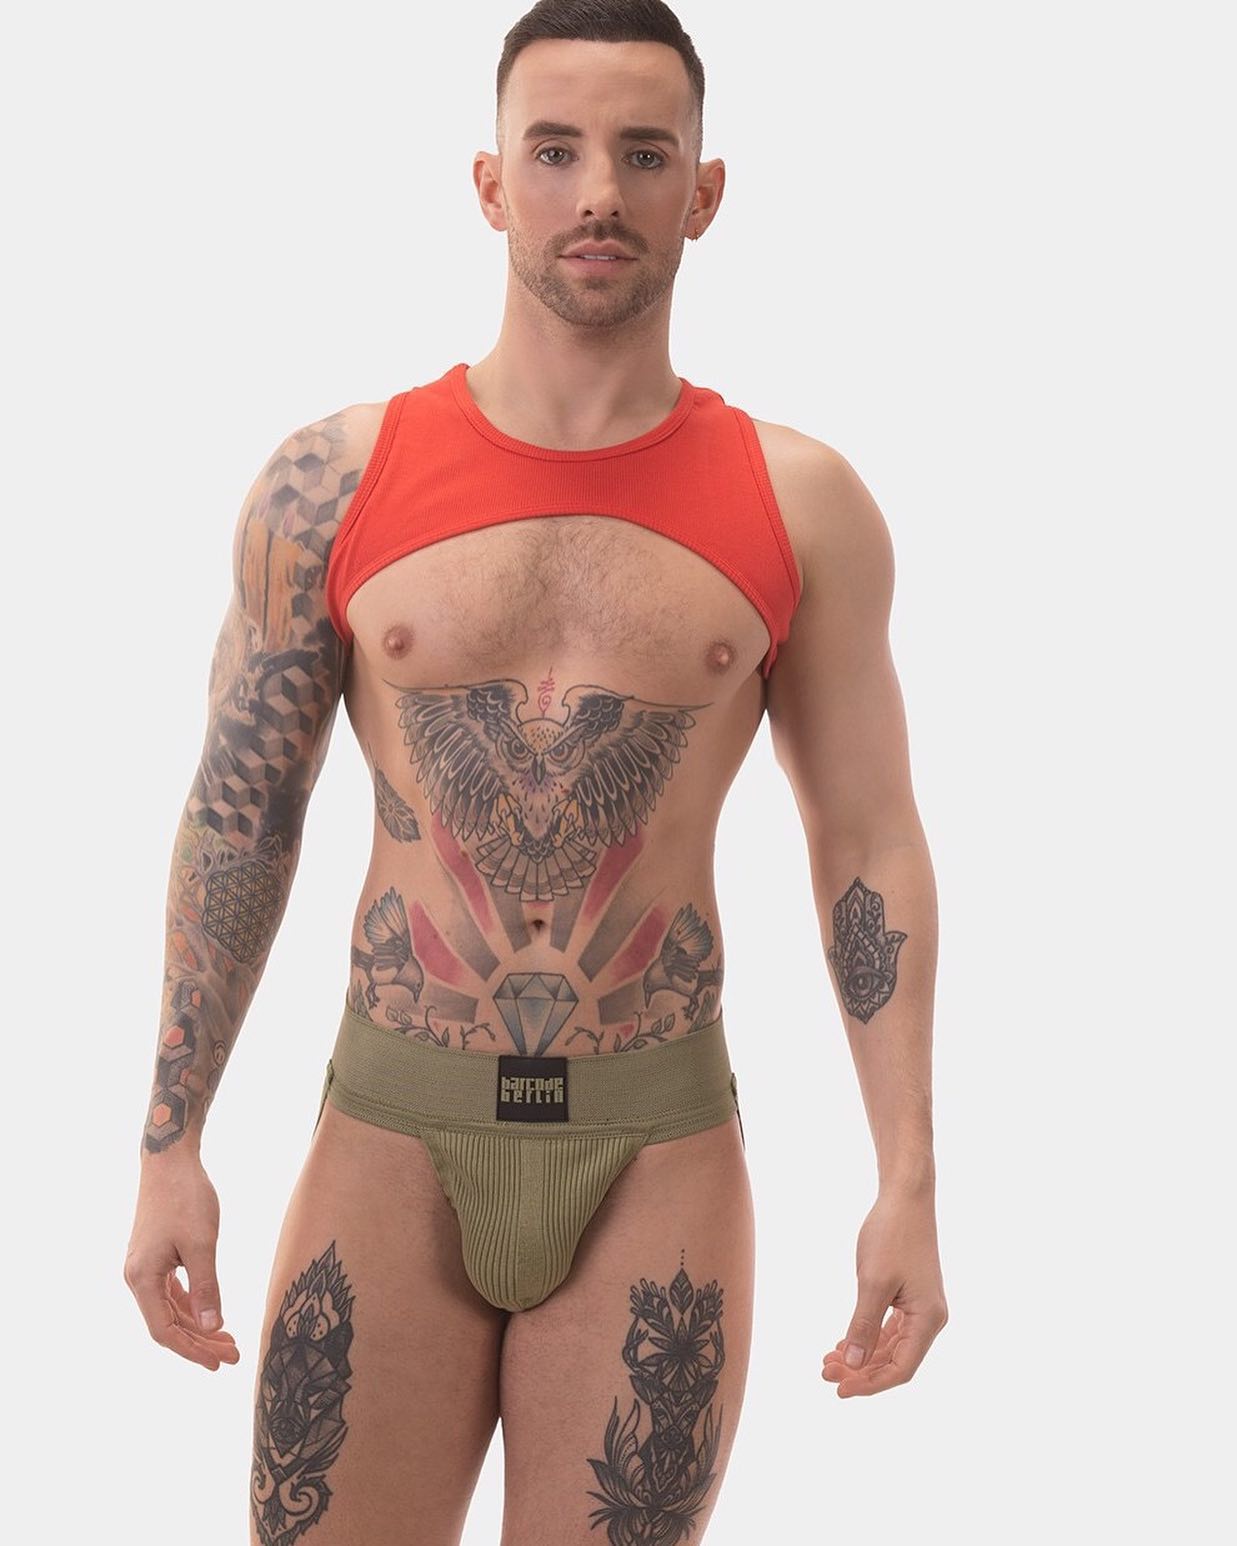 The limited edition Sergey Pop Jockstrap in the Grassland Beige colour, almost sold out in just a few days! Check it out:
_____
menandunderwear.com/shop